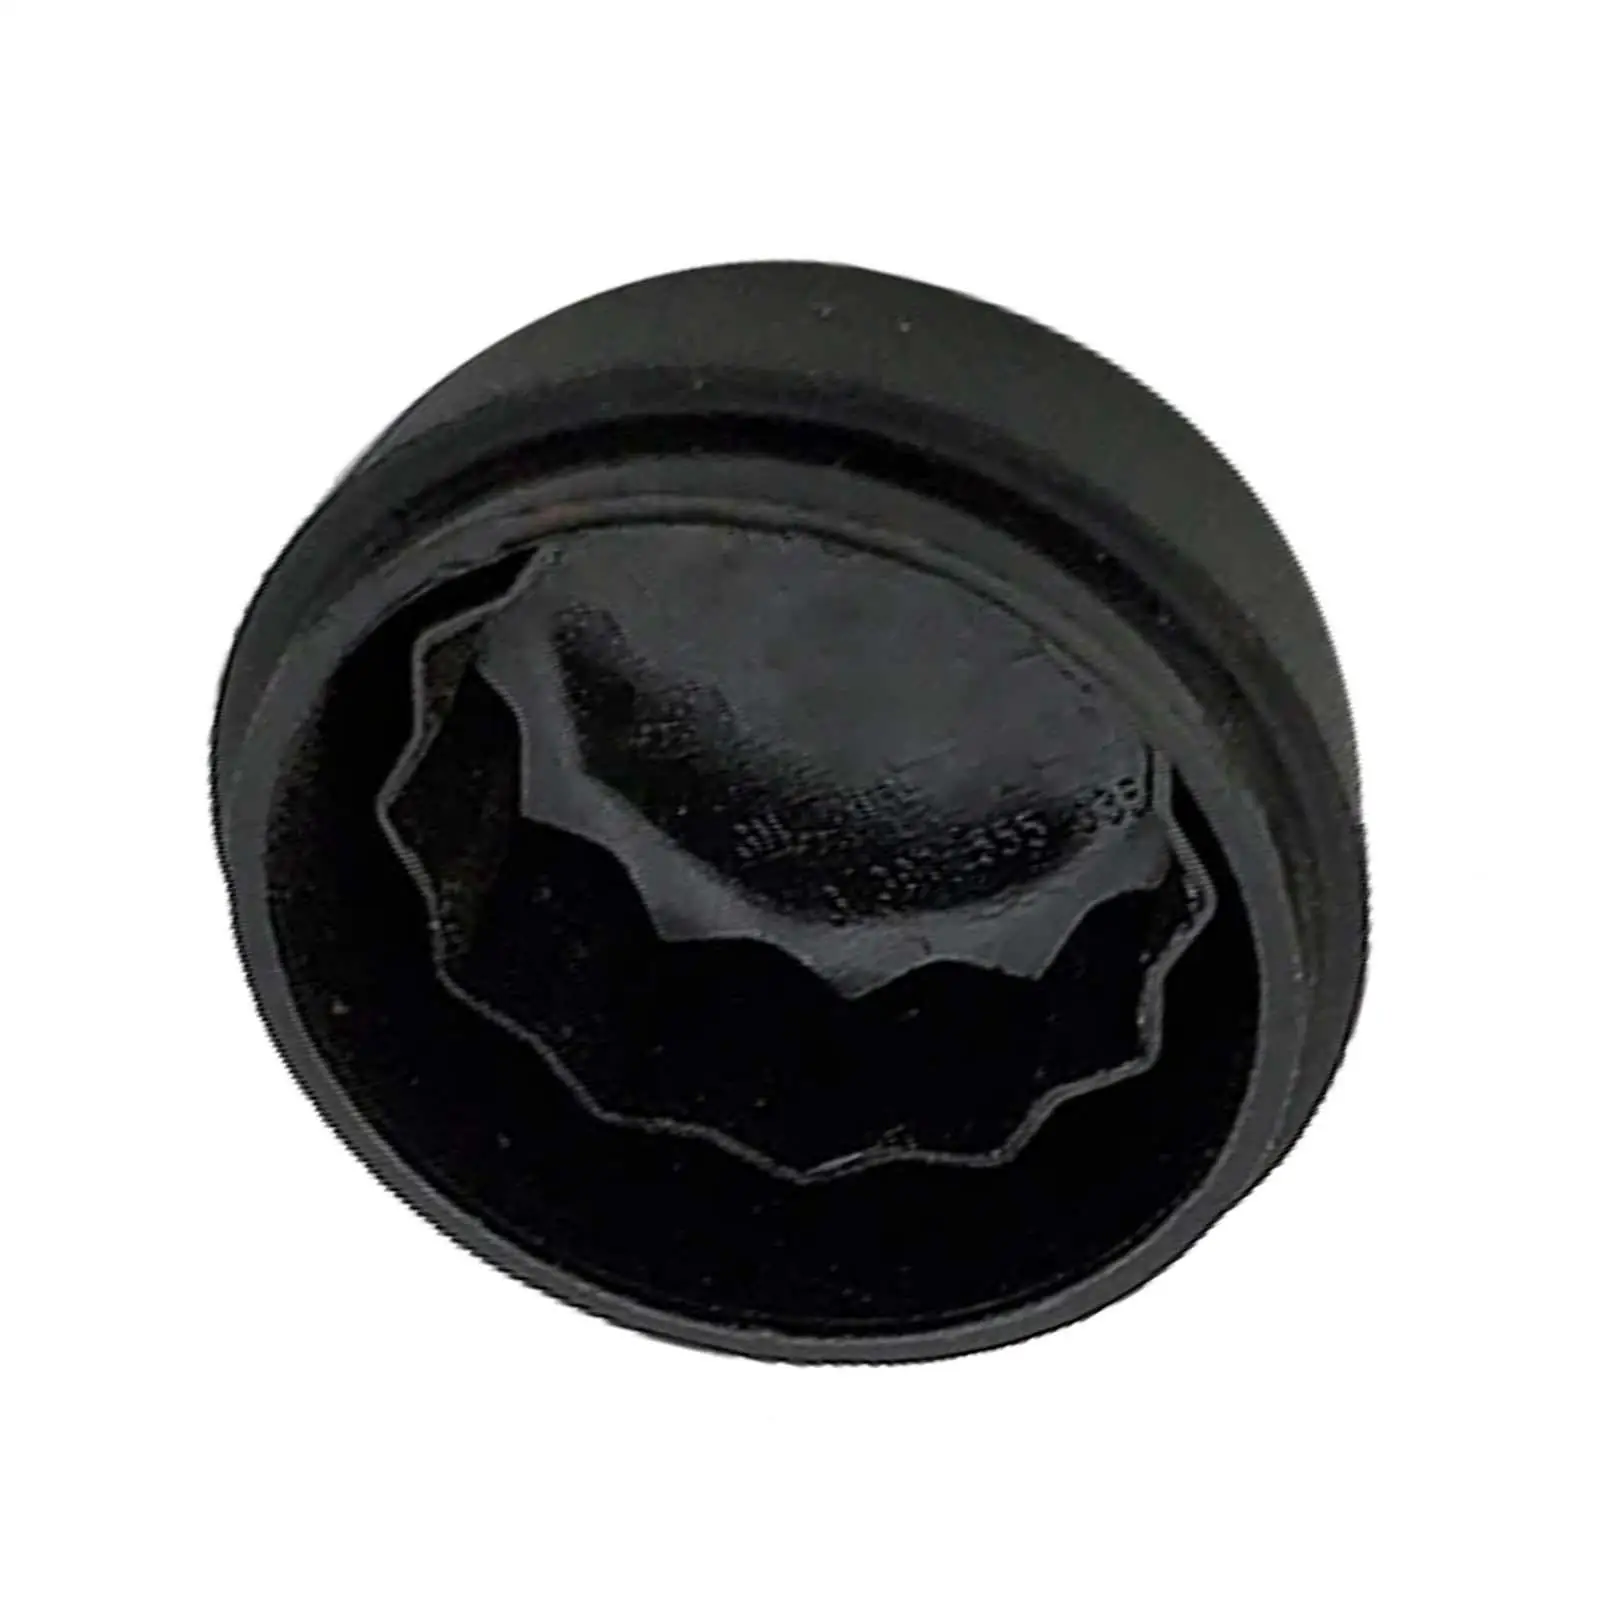 Car Wiper Nut Cap Repair Parts 1106610-00-a Replacement for Tesla Model 3 Professional Car Accessory Easy Installation